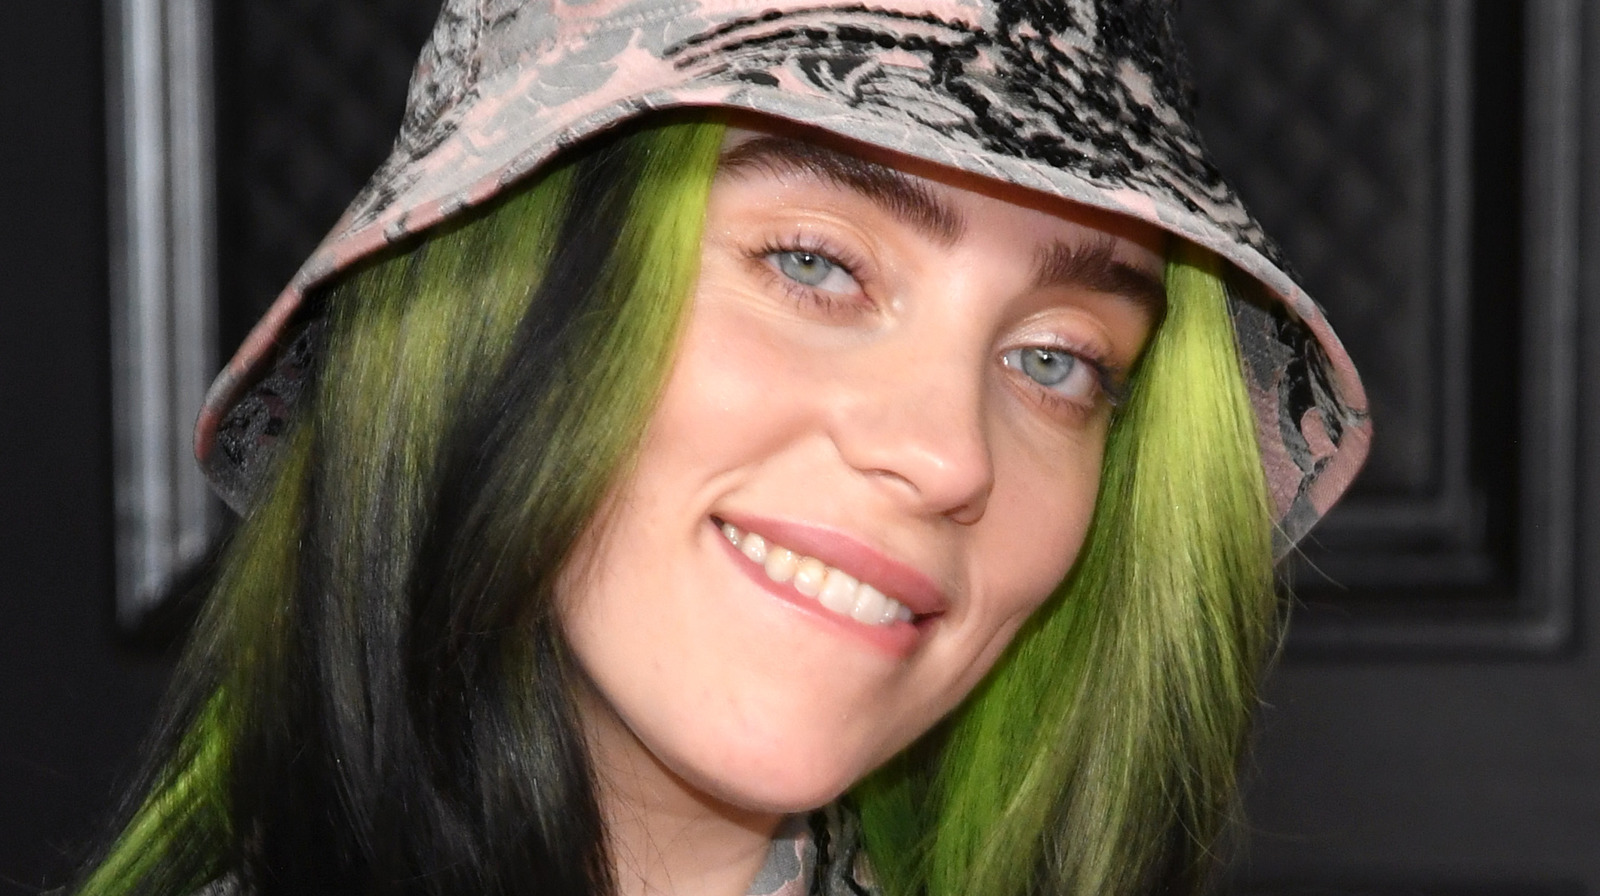 Billie Eilish's iconic green outfit and blue hair - wide 1